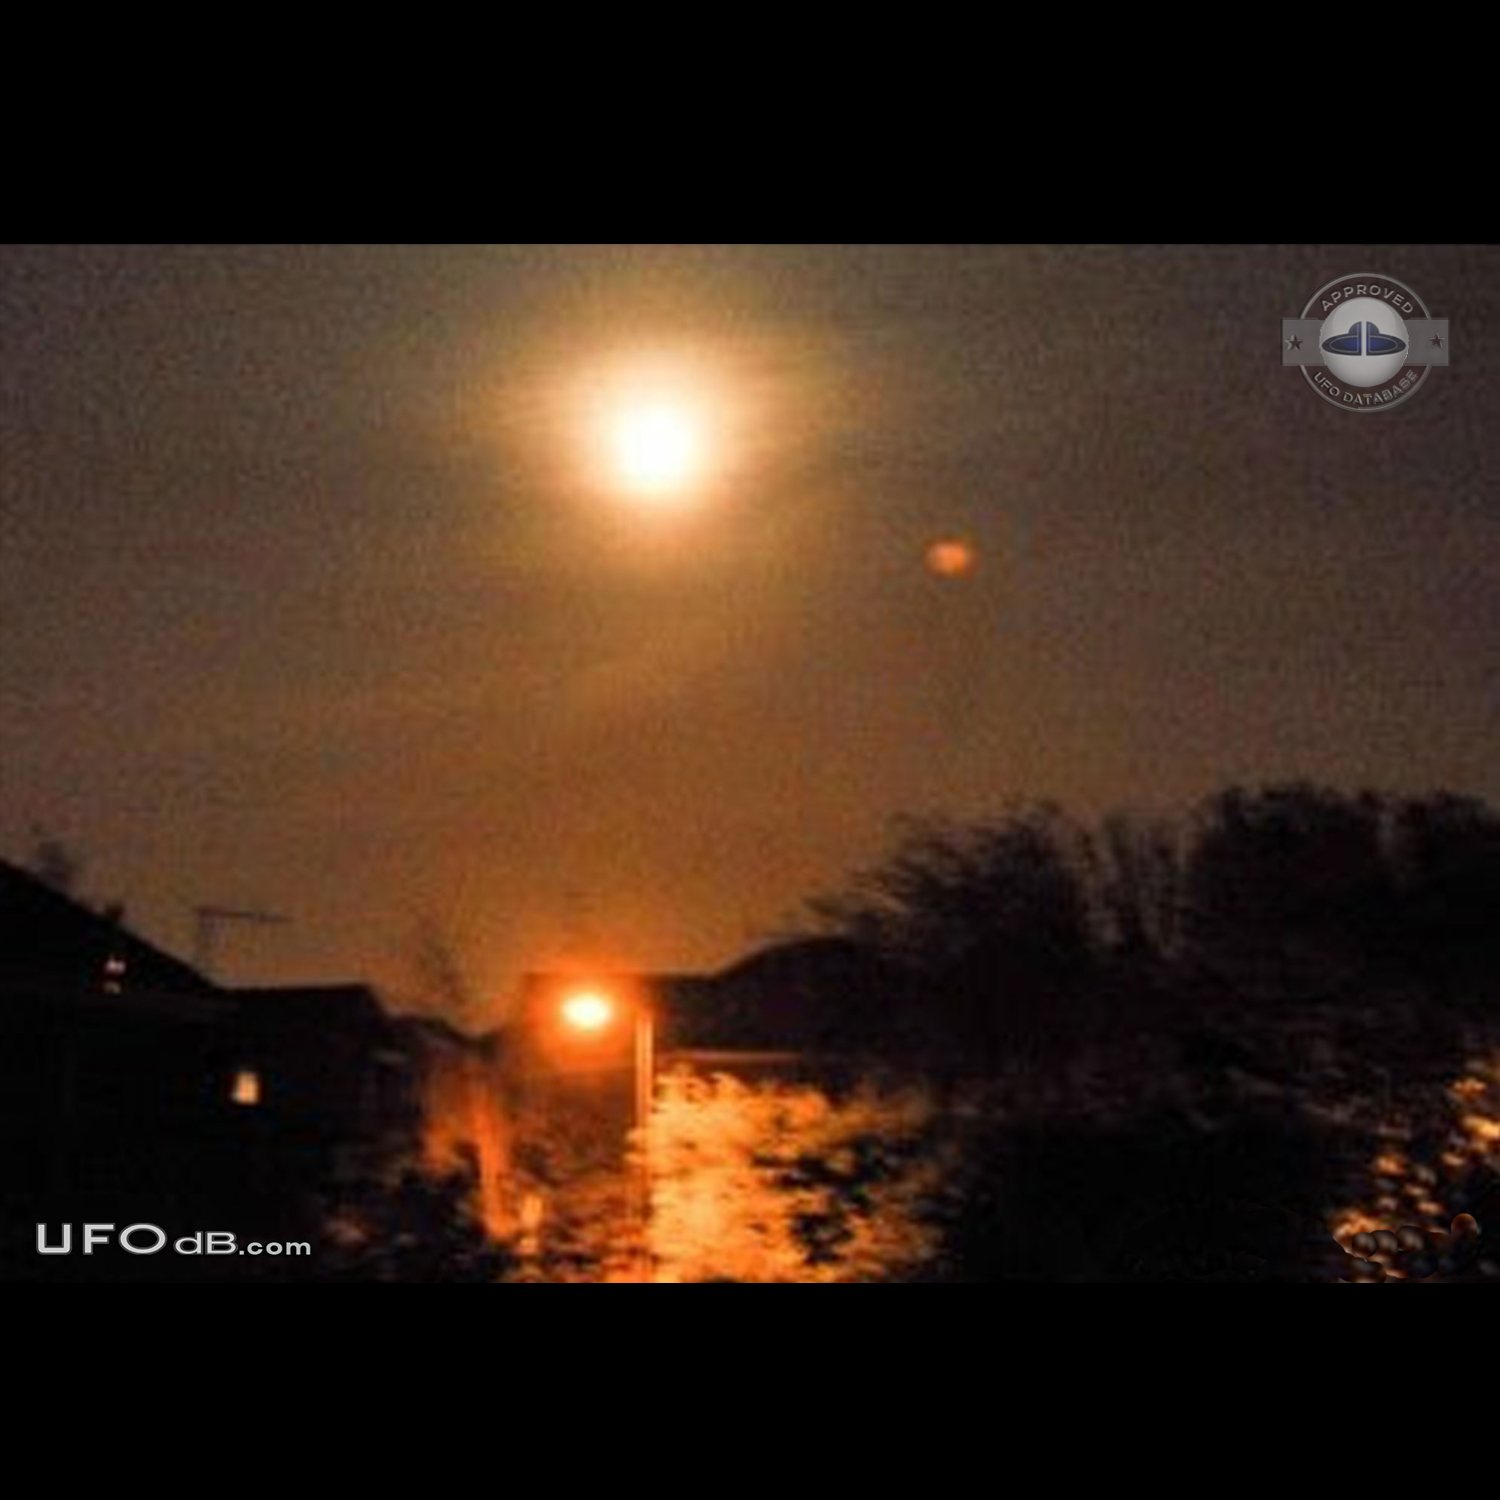 Glowing Orange Sphere UFO caught on picture in Sheffield UK in 2012 UFO Picture #485-1